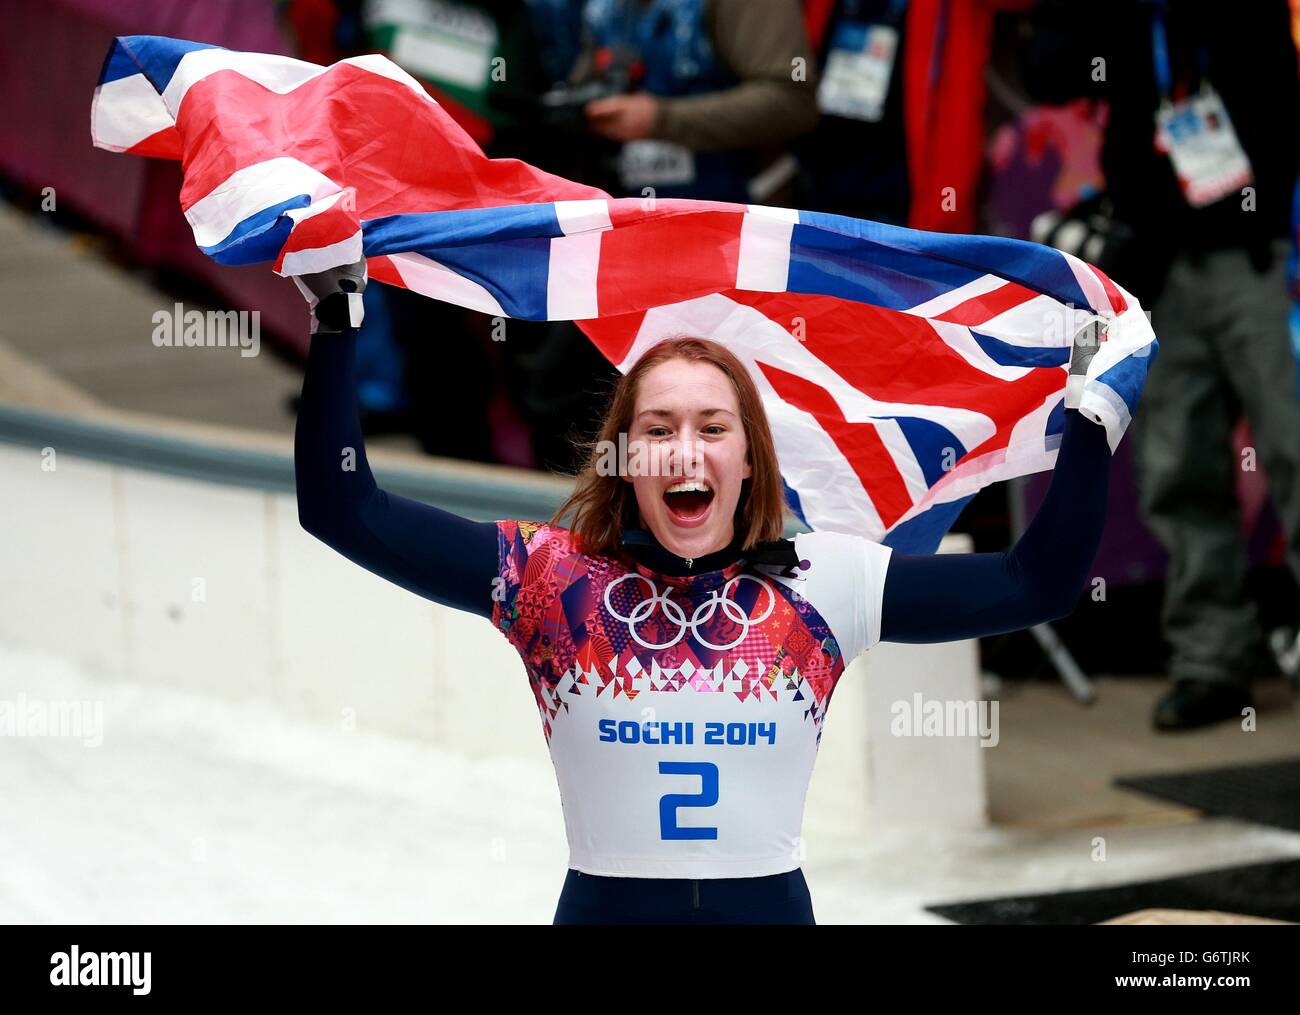 Great Britain's Lizzy Yarnold celebrates winning gold in the Women's Skeleton during the 2014 Sochi Olympic Games in Sochi, Russia. Stock Photo